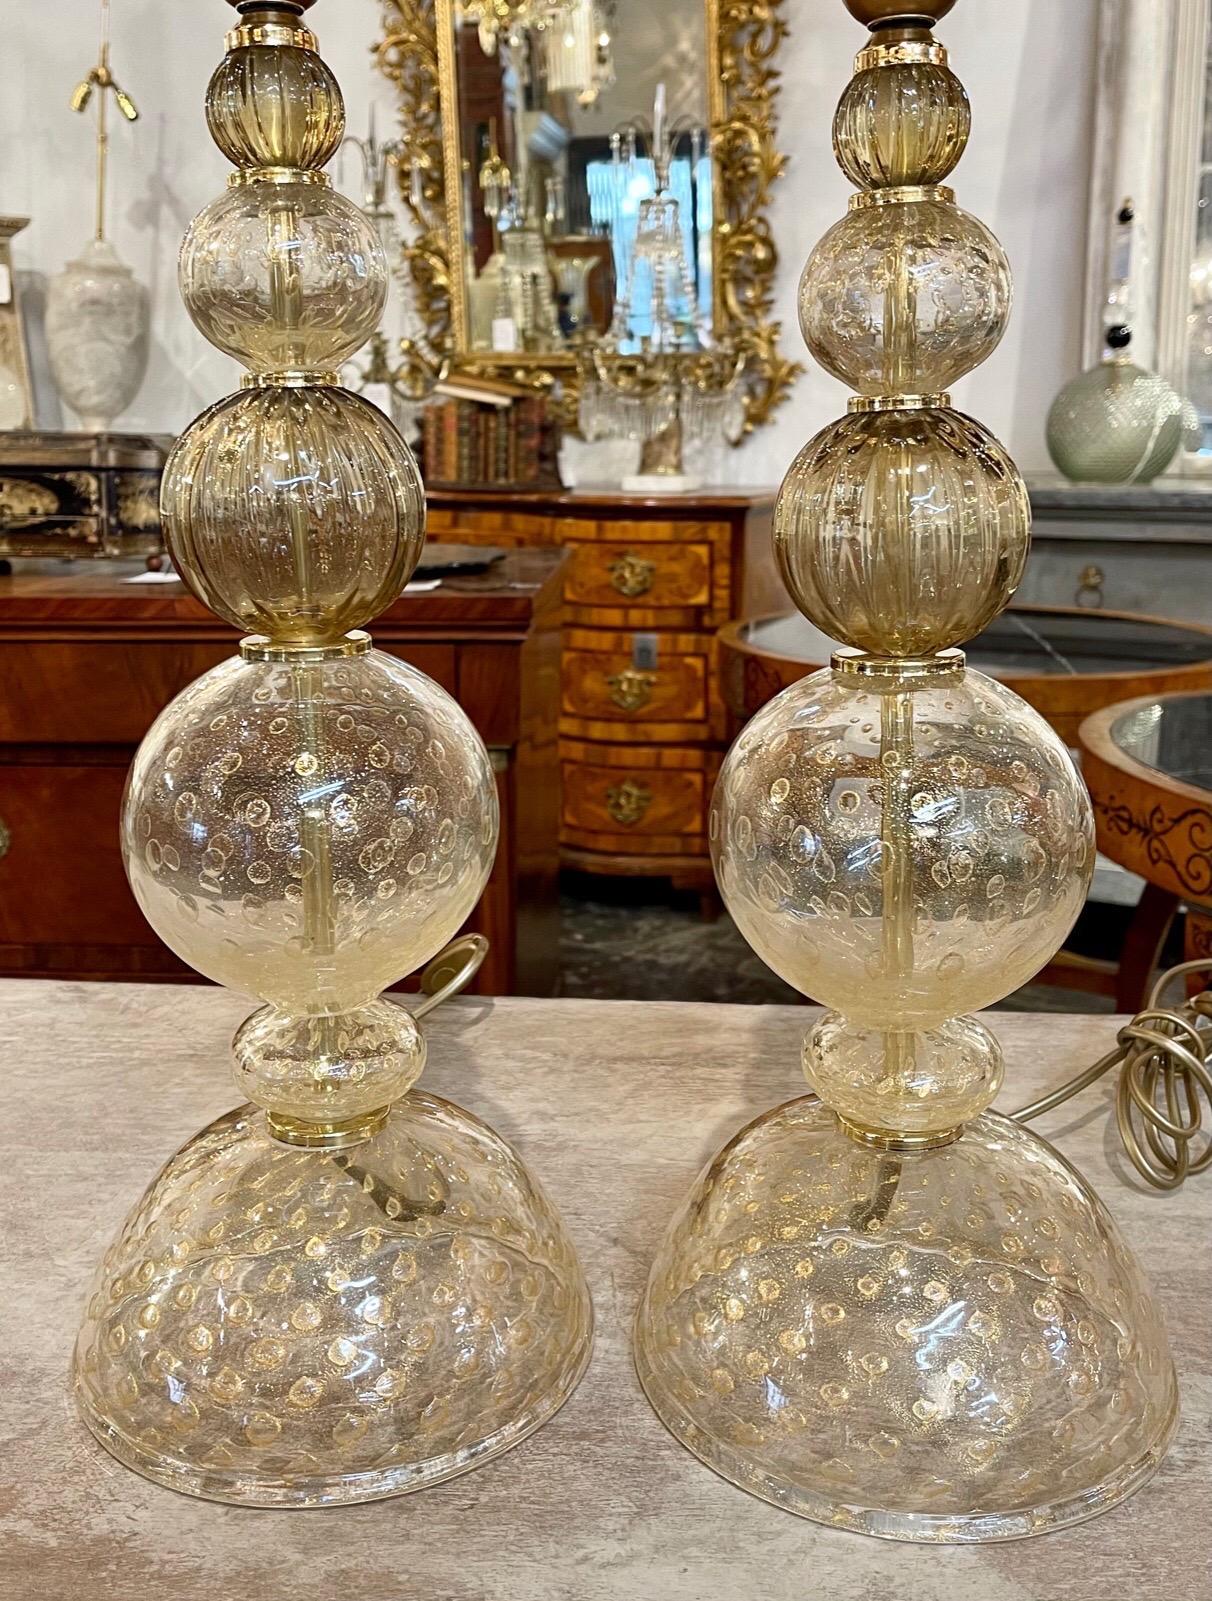 Lovely pair of vintage gold Murano glass lamps. Featuring graduated balls with beautiful flecks of gold throughout the glass. So pretty!!